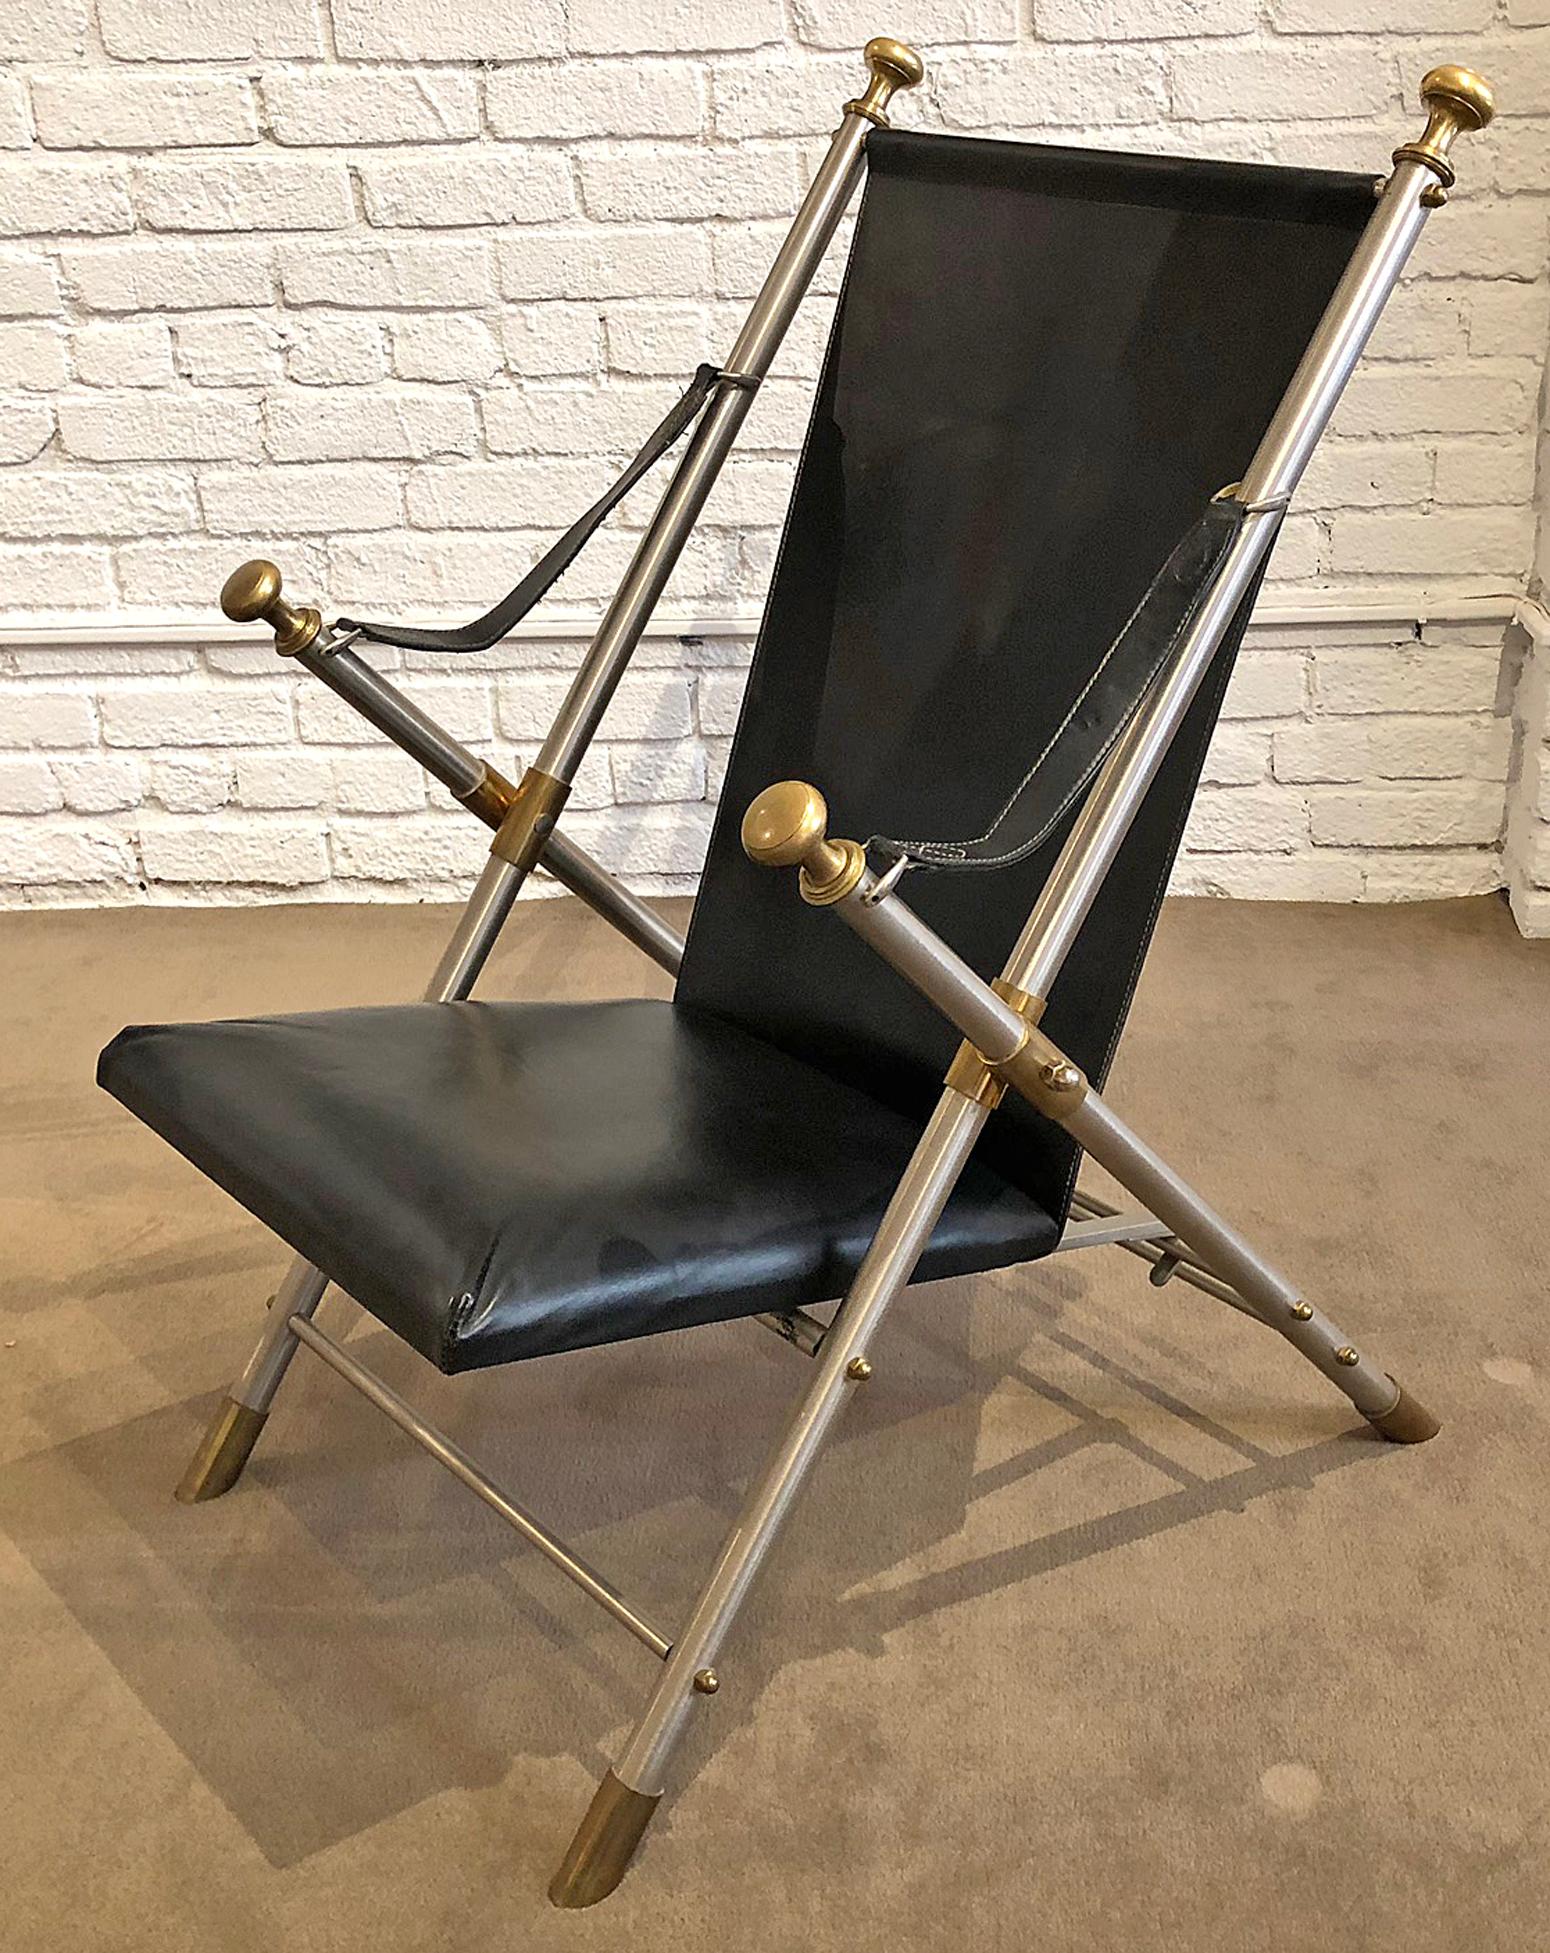 One Campaign chair, featuring saddle leather back and seat along with steel frames and brass details. This is very heavy and is comfortable. Original patina to all metal. The leather has been conditioned. This is ready to use.